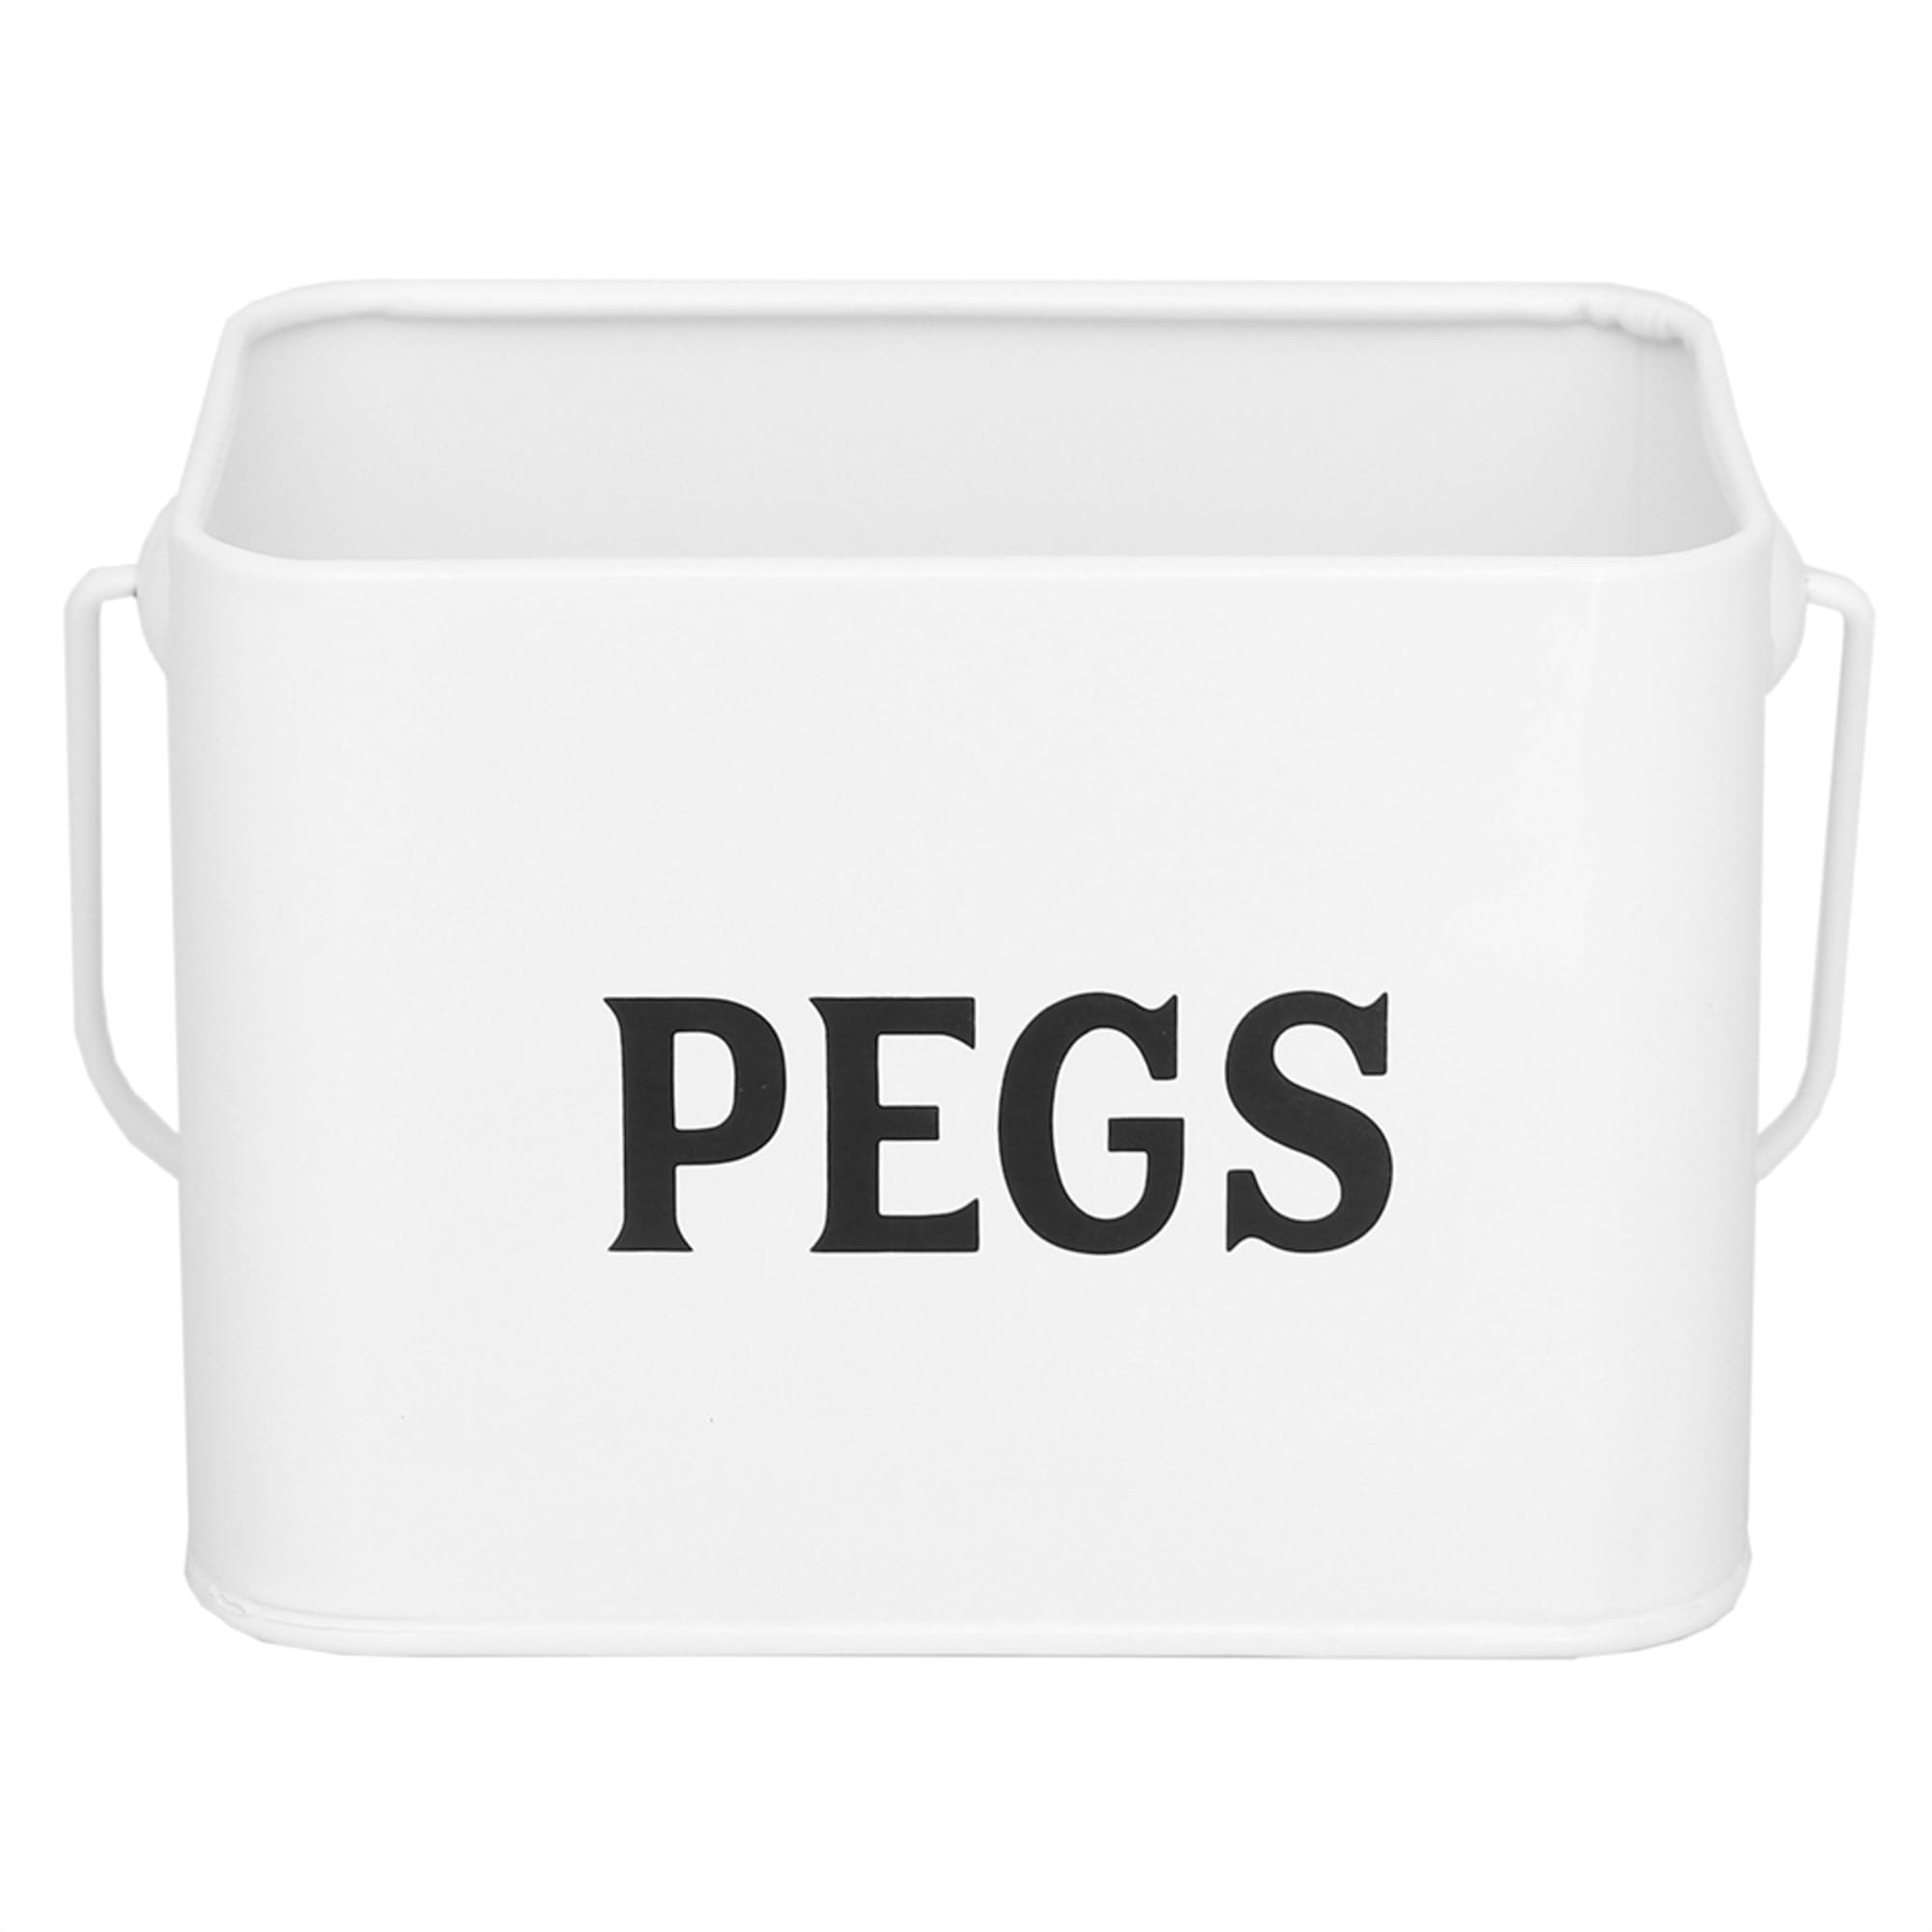 Home Basics Countryside Tin Peg Holder with Handle, White $4.00 EACH, CASE PACK OF 12